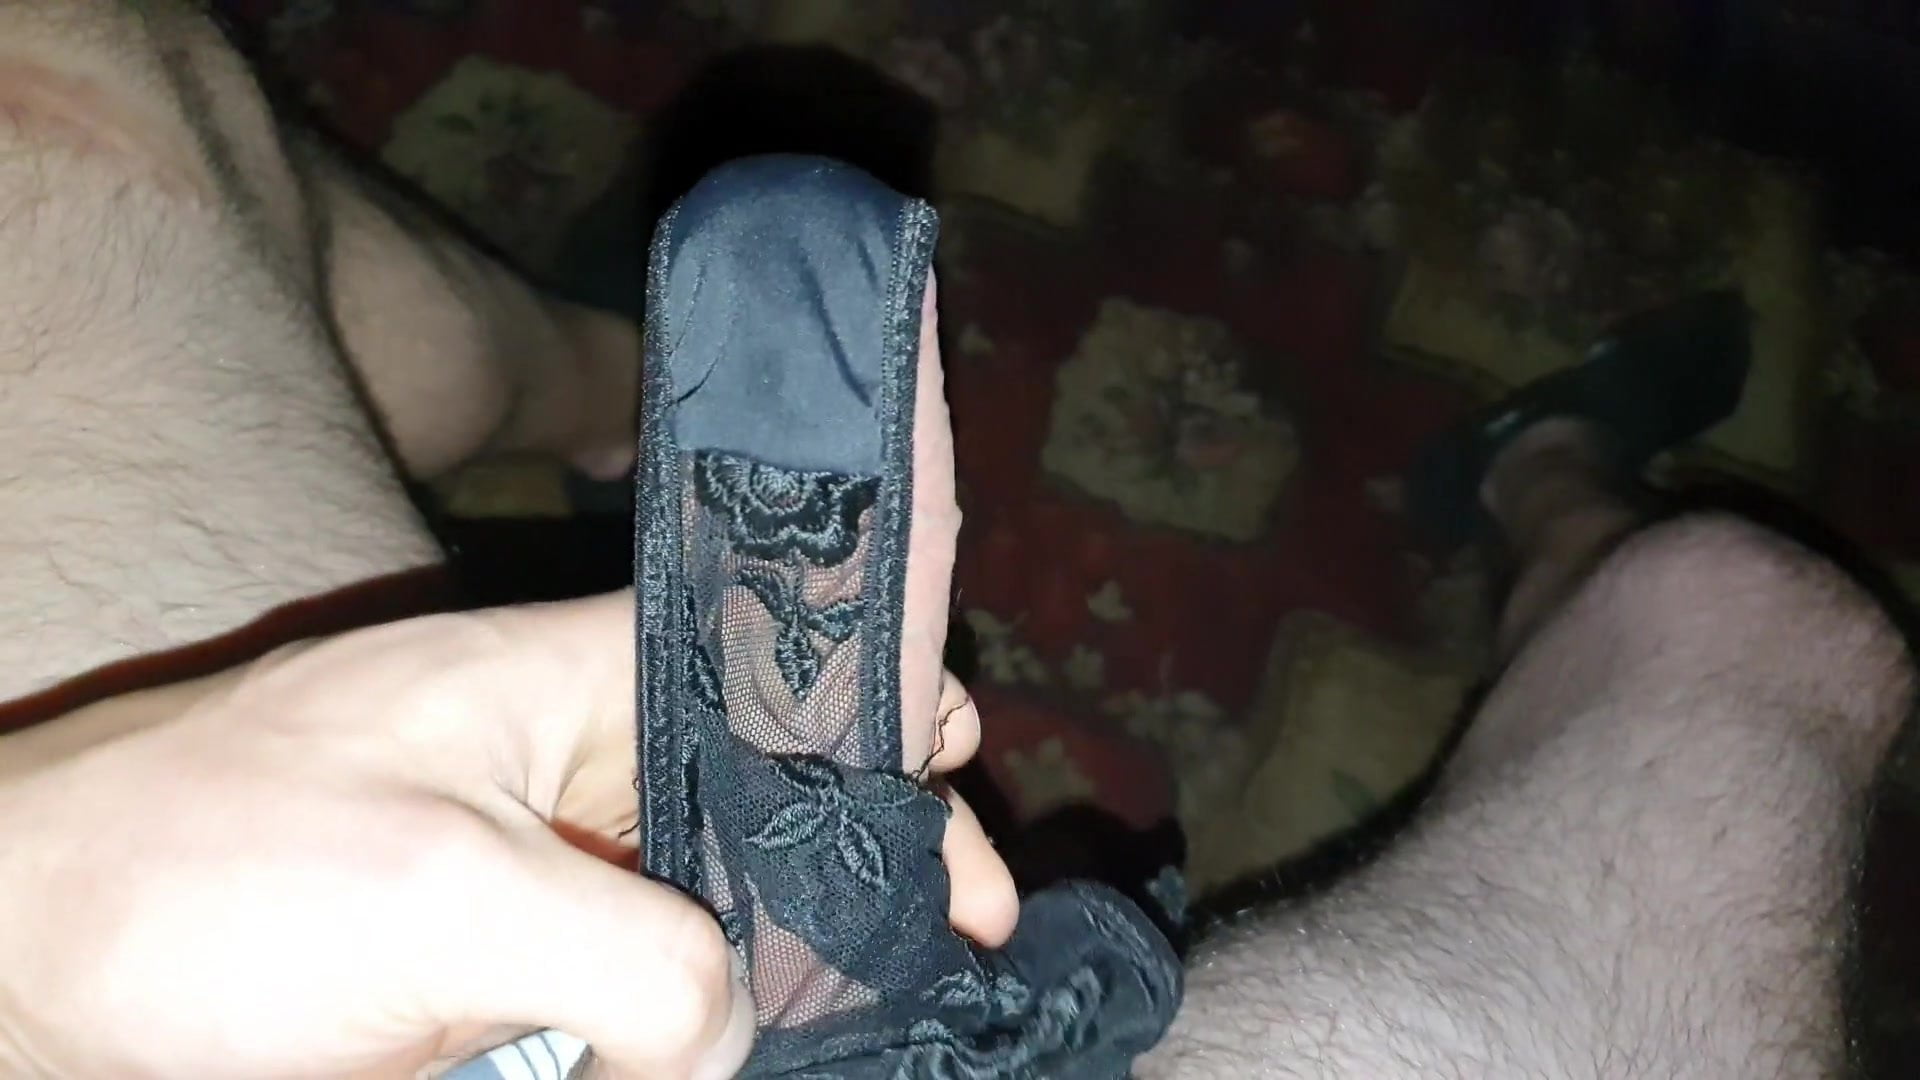 Jerking Off In Mommys Room And Cuming In Her Panties